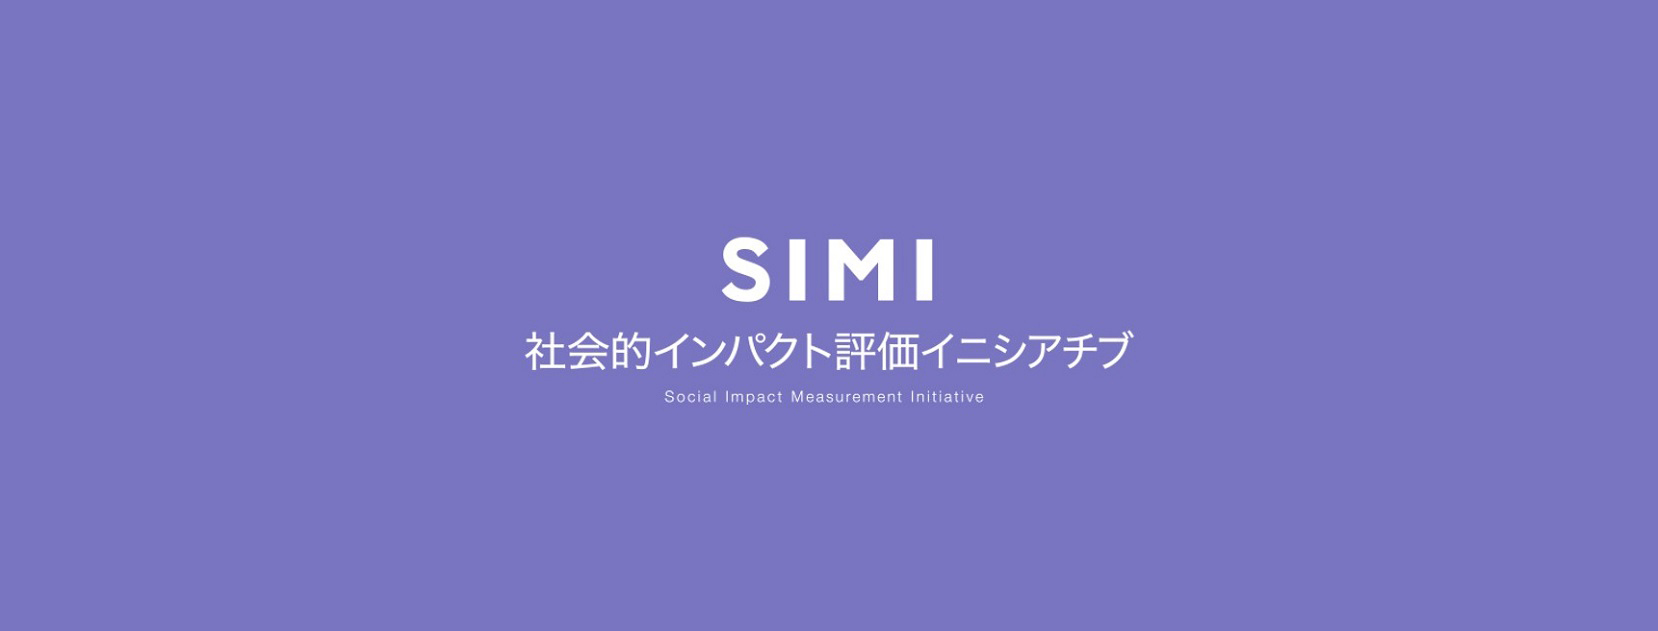 SIMI 社会的インパクト評価イニシアチブ